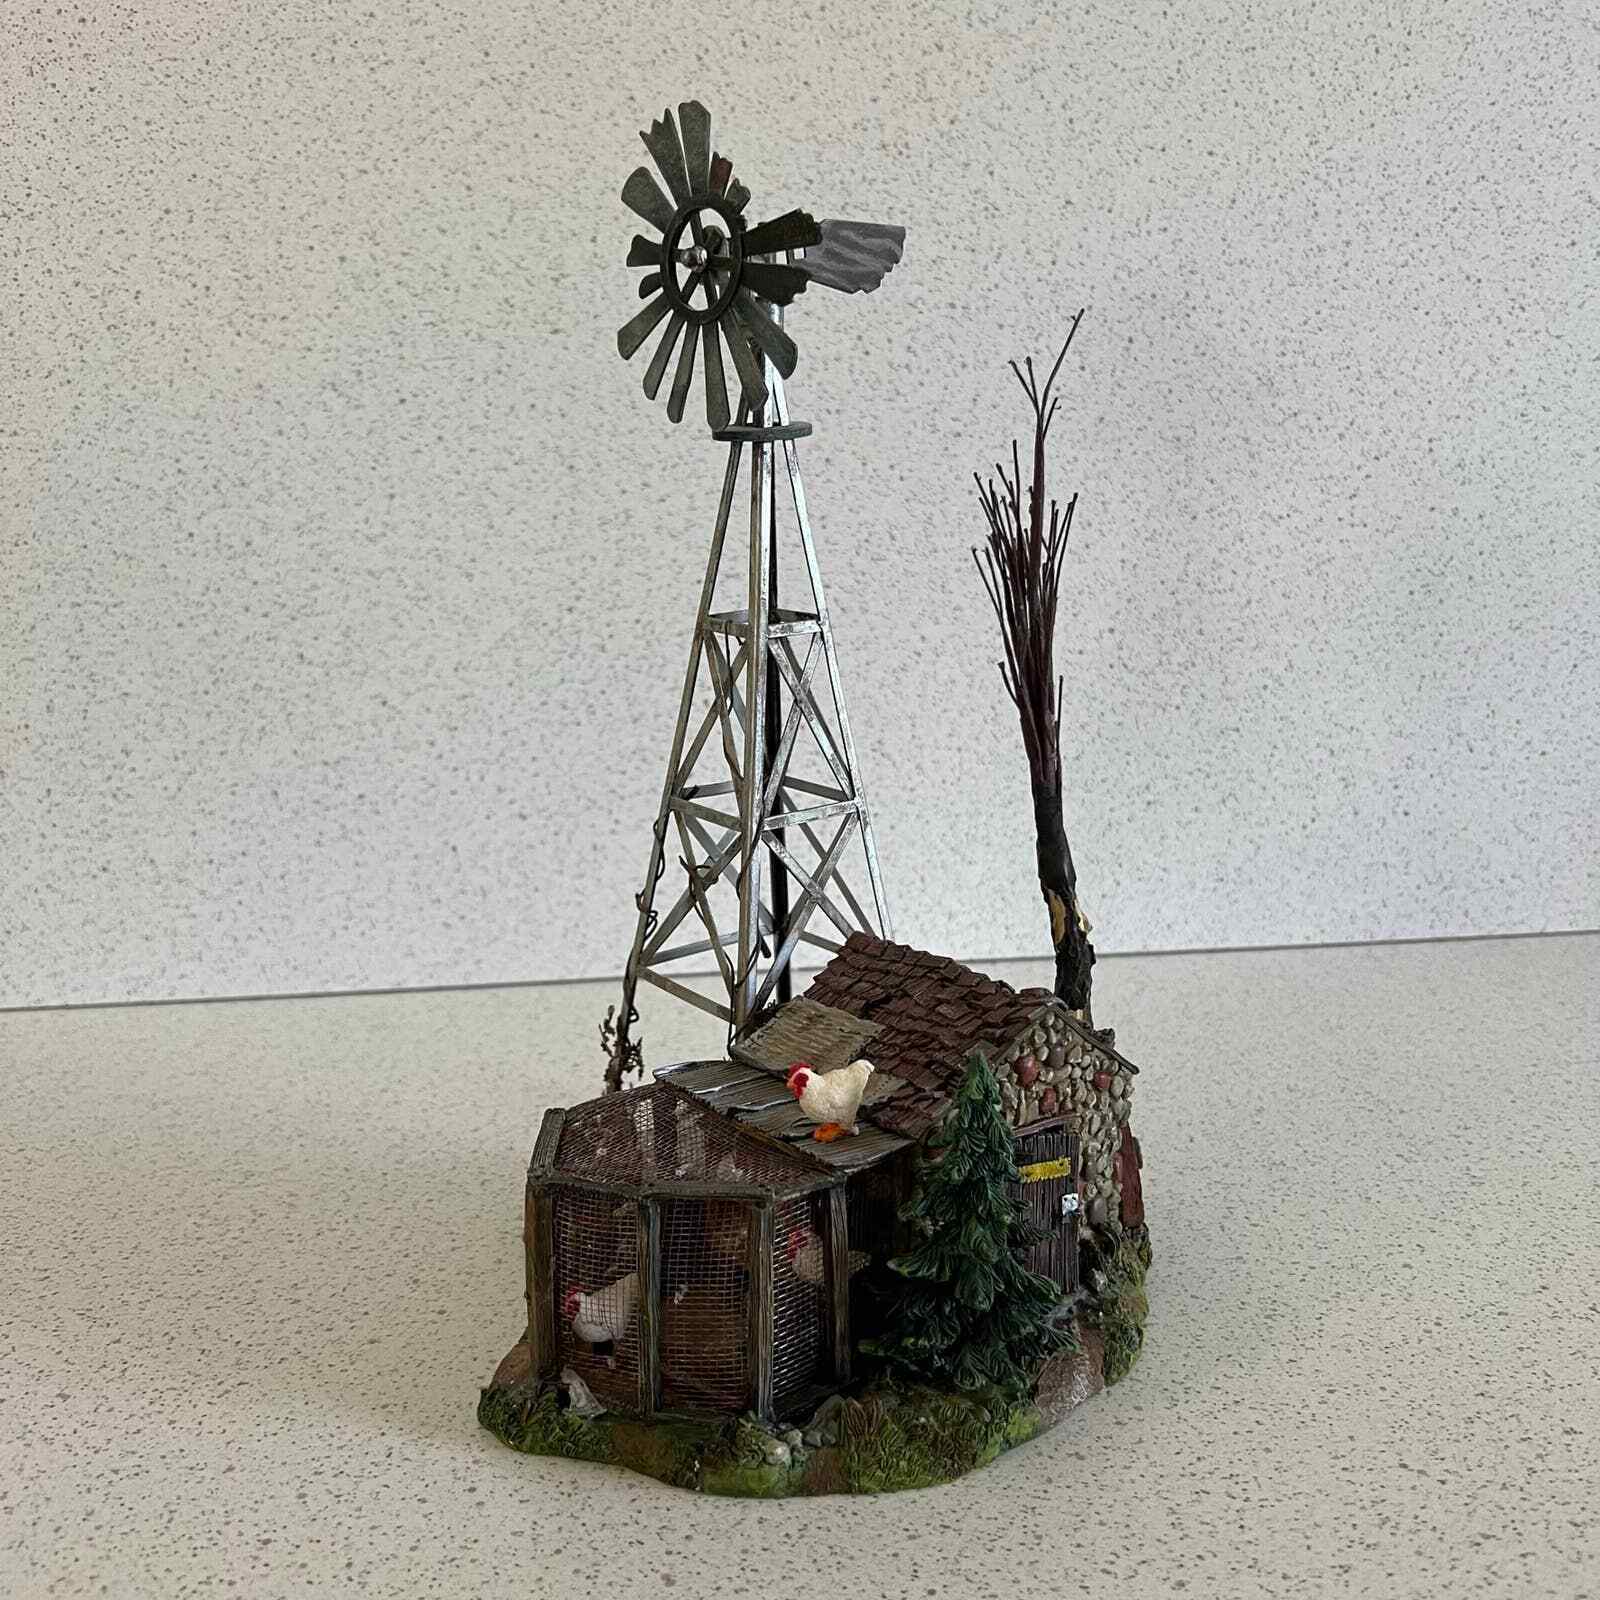 Dept. 56 Windmill By The Chicken Coop Christmas Bucks County Snow Village #52867